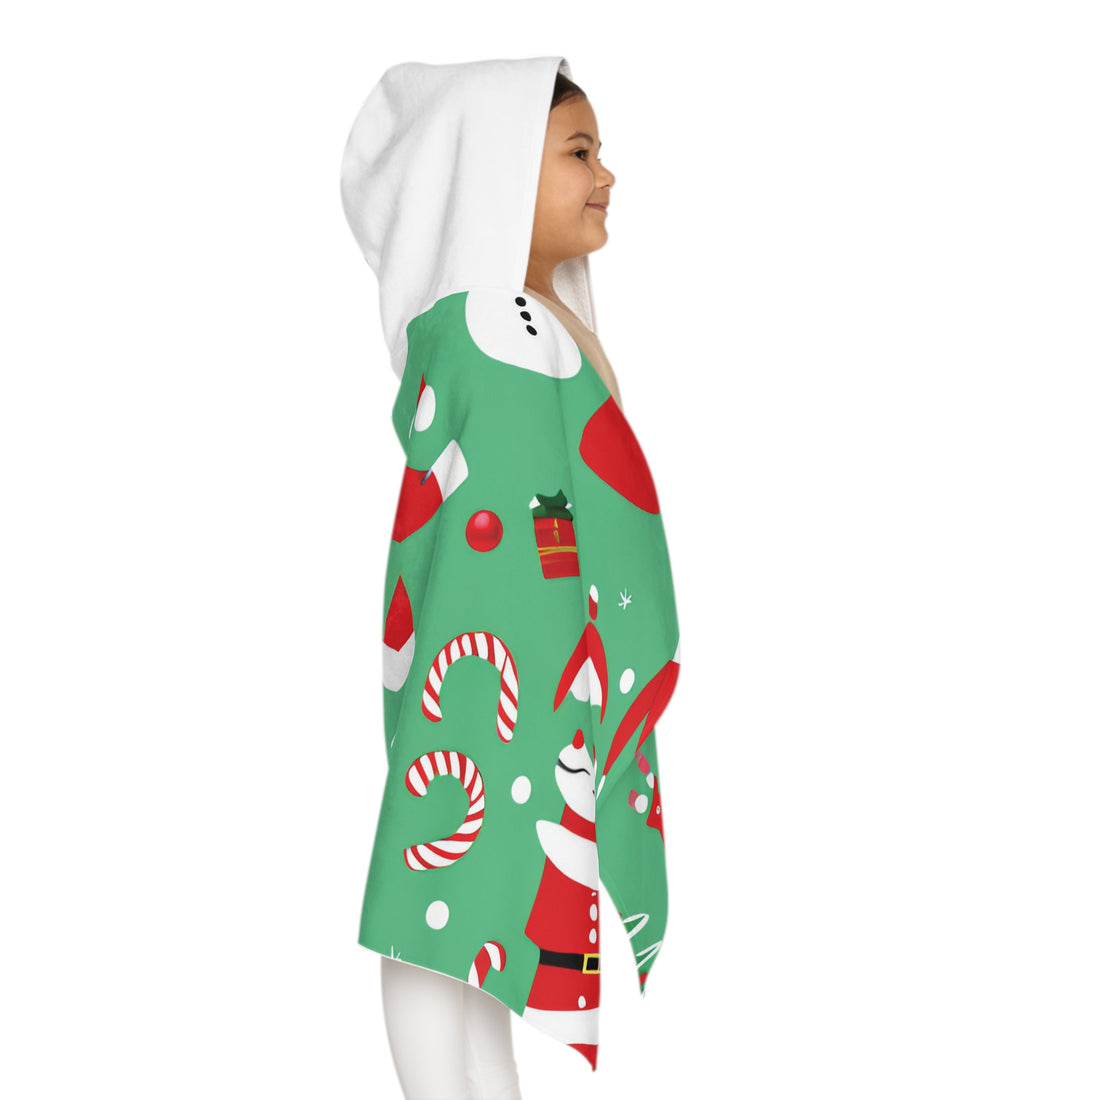 Youth Hooded Christmas Towel